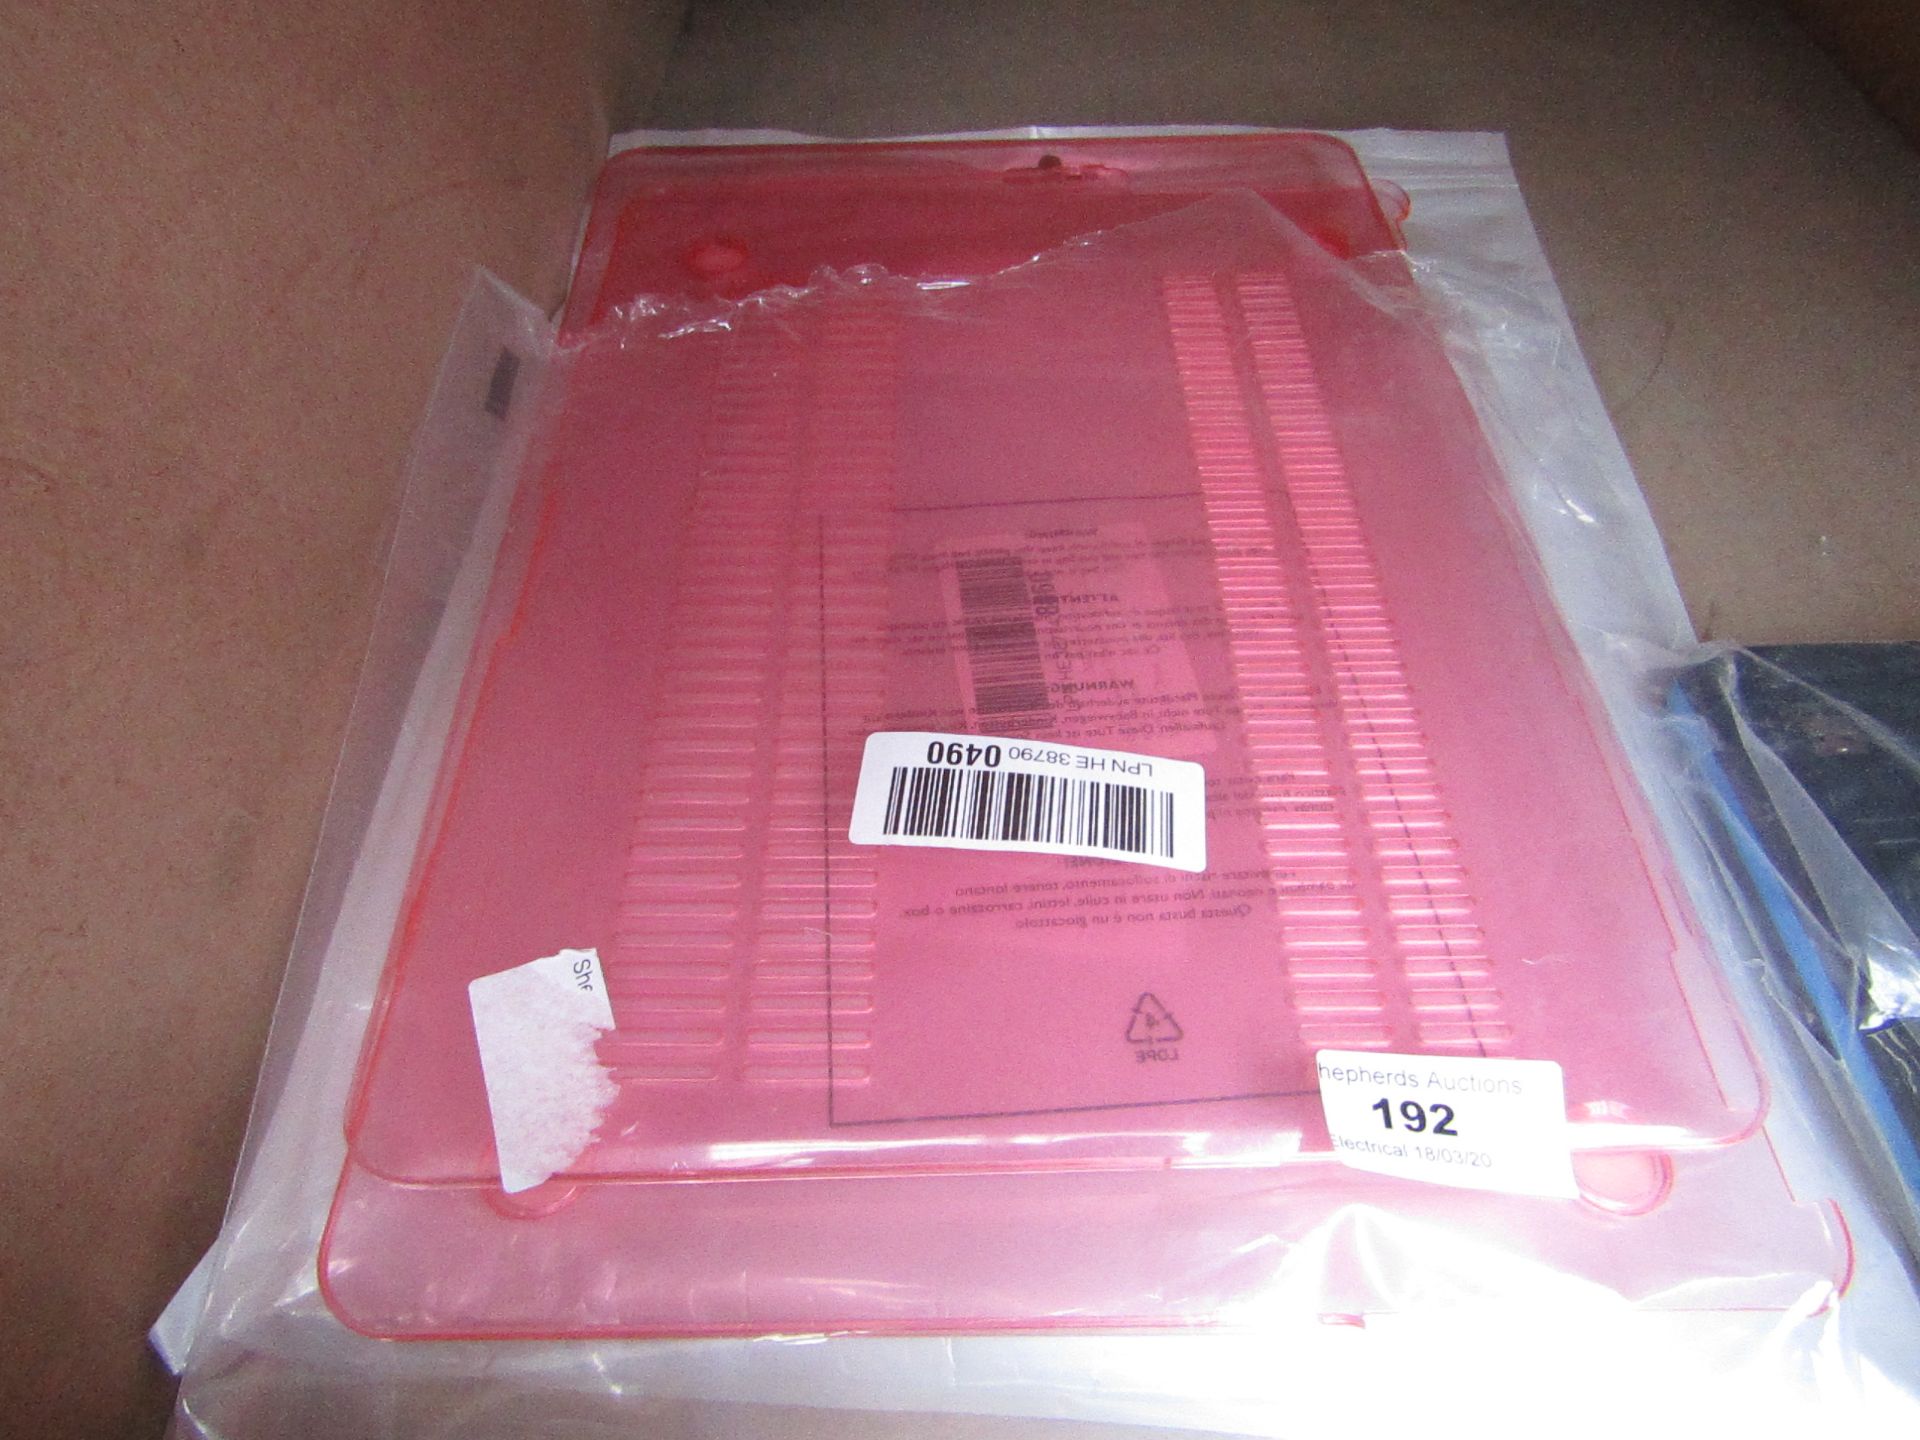 2x Various Cases for MacBook Air - Packaged.